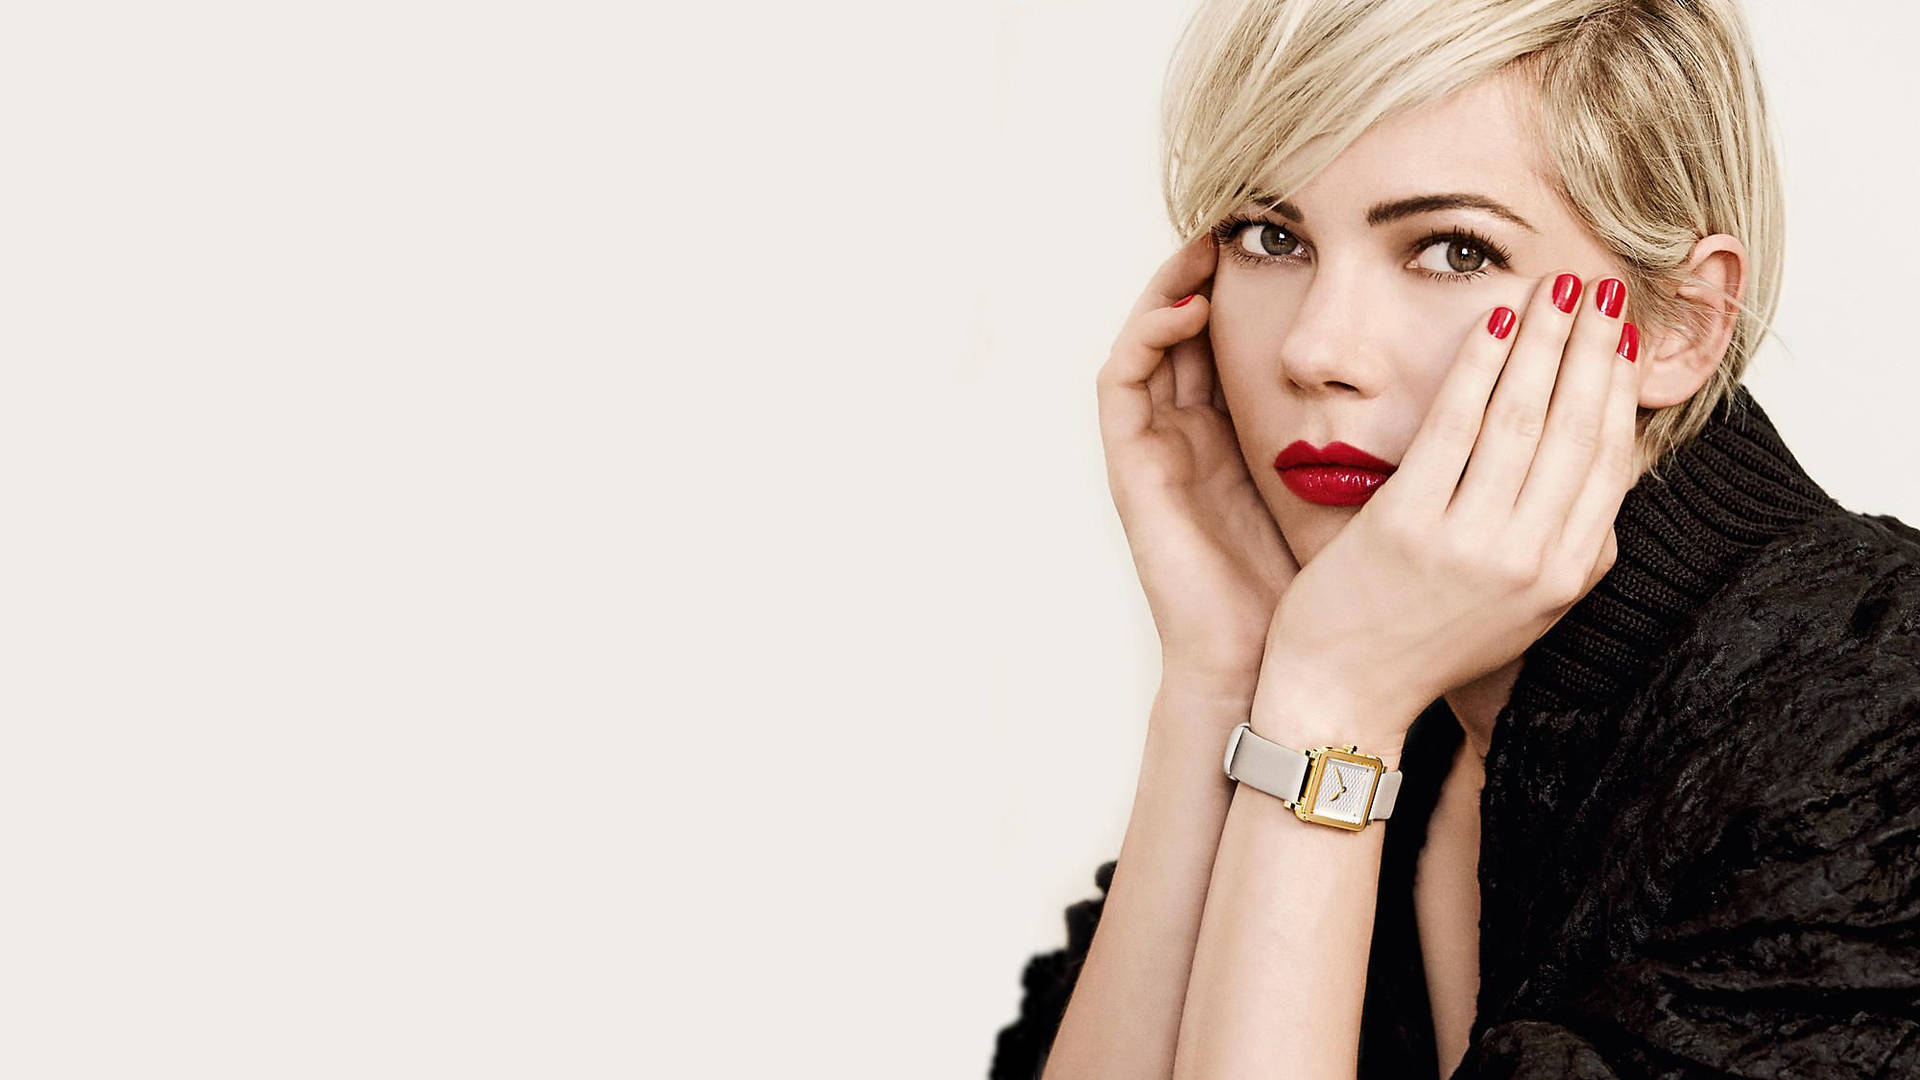 Actor Michelle Williams for Louis Vuitton 2013 Print Ad - Great to Frame!